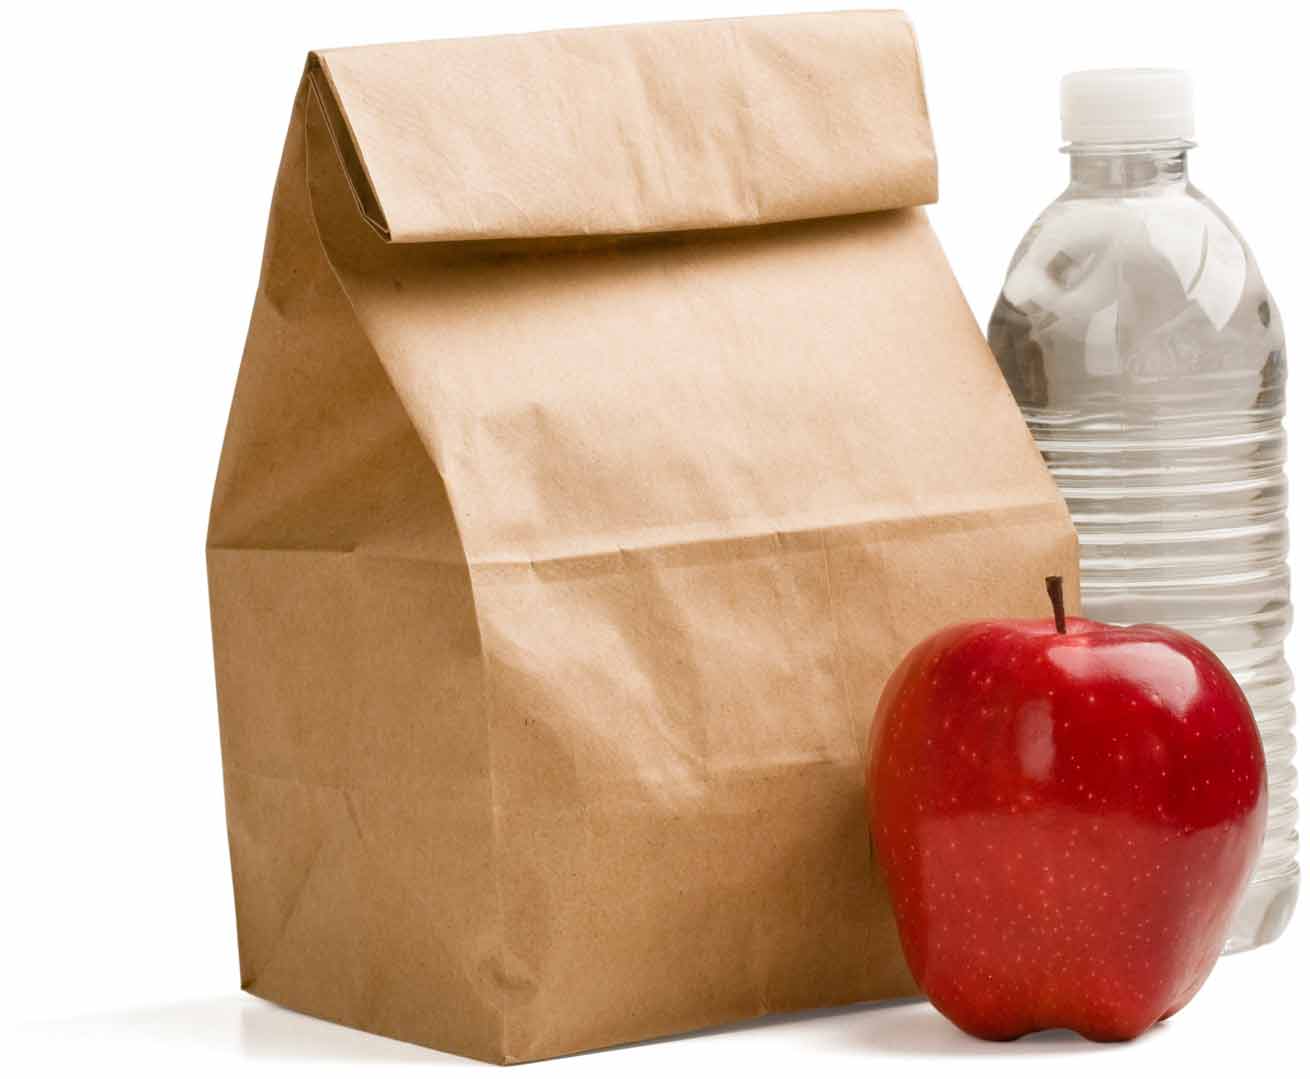 Build Sack Lunches and Deliver to Interfaith in Escondido